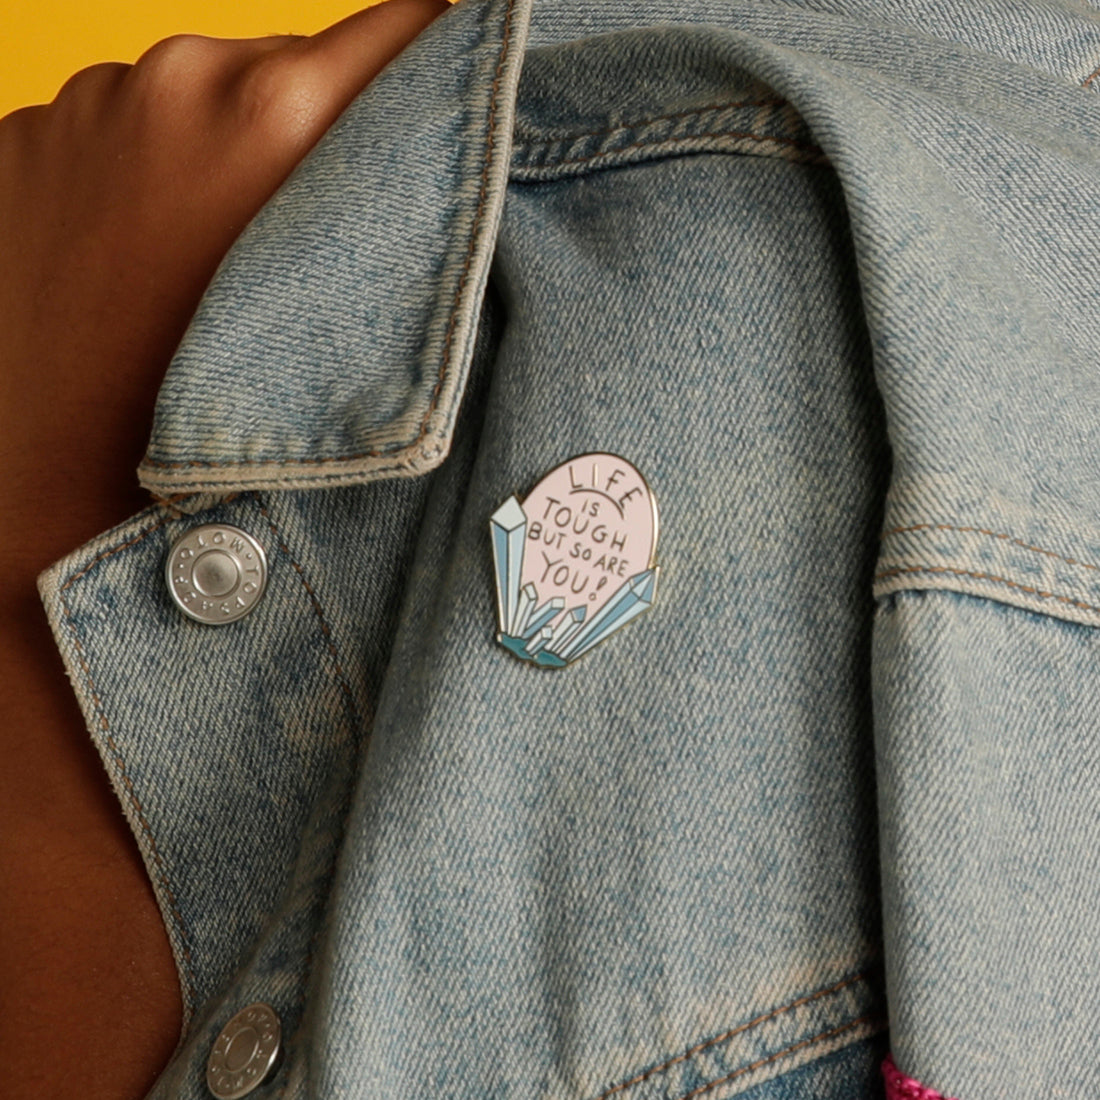 Life is Tough But So Are You enamel pin on denim jacket